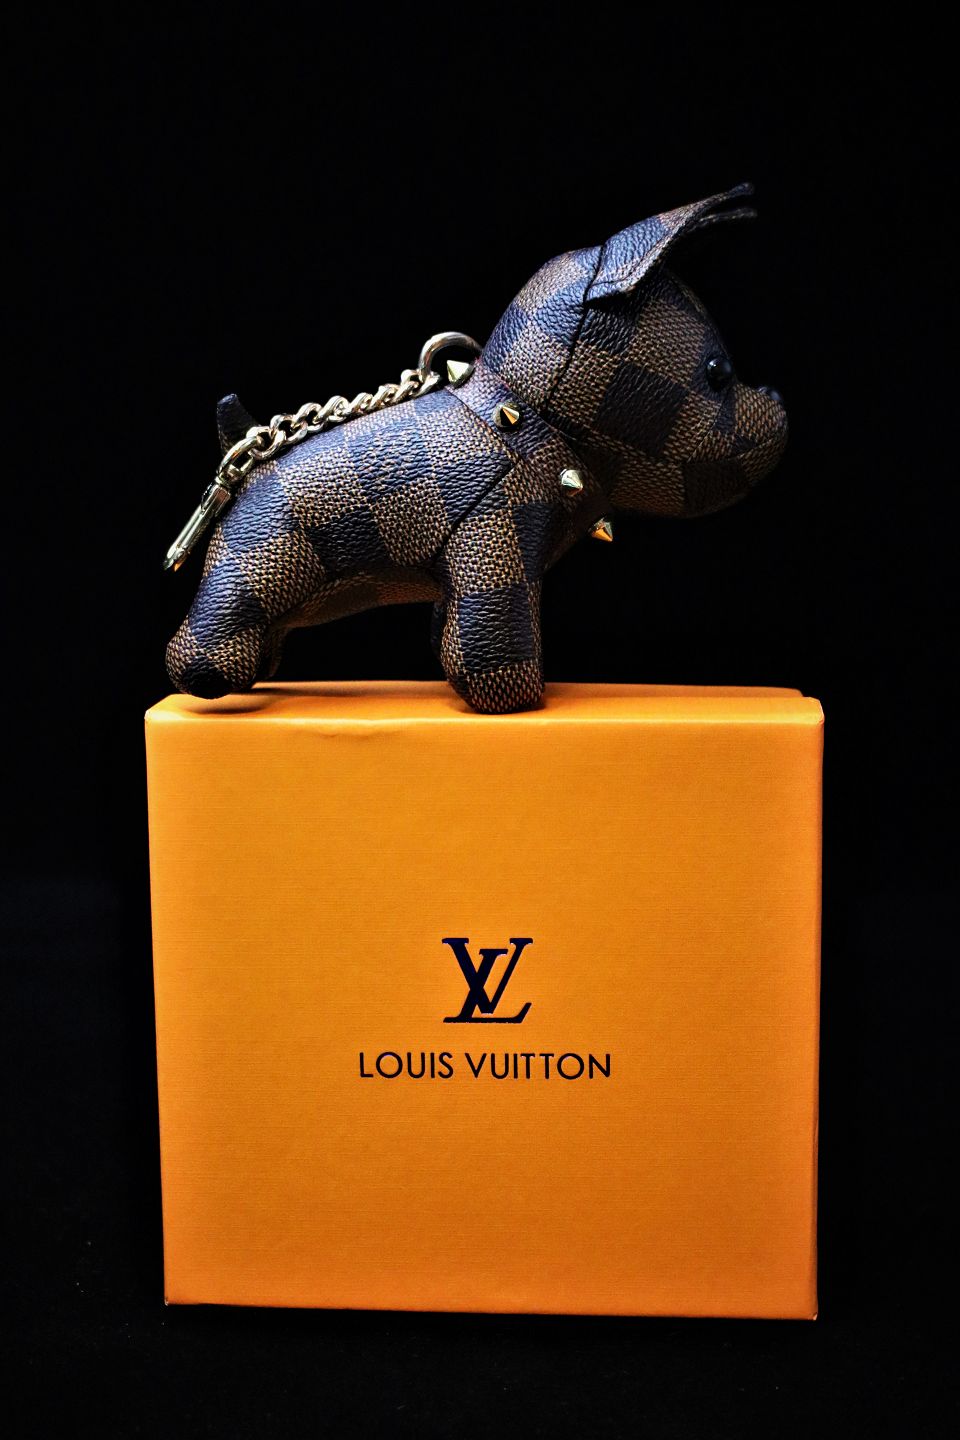 Louis Vuittton's New Accessories Are an Entire Empire